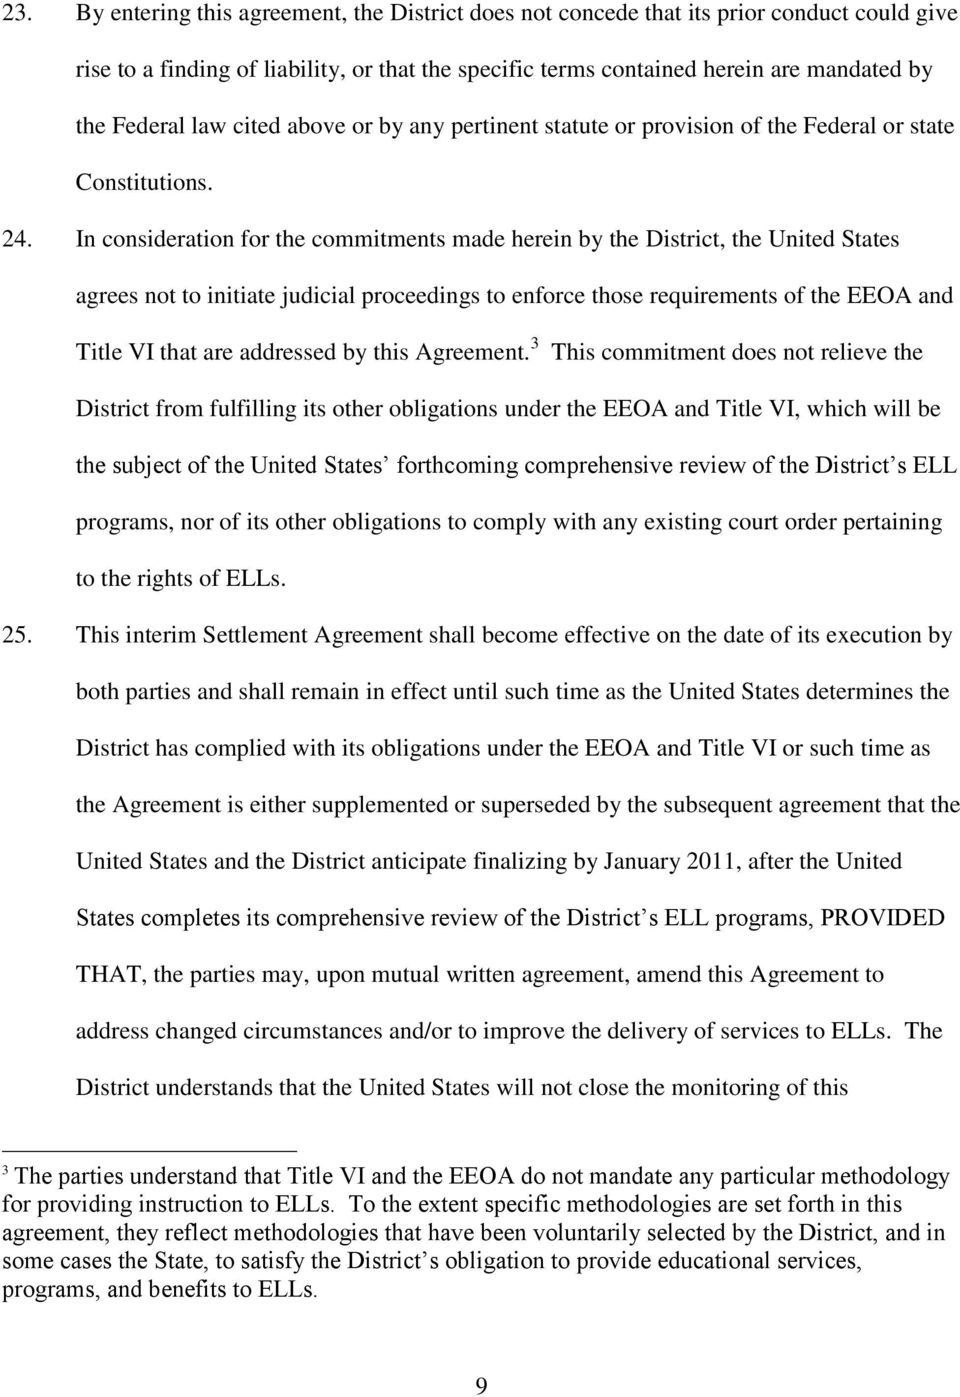 In consideration for the commitments made herein by the District, the United States agrees not to initiate judicial proceedings to enforce those requirements of the EEOA and Title VI that are